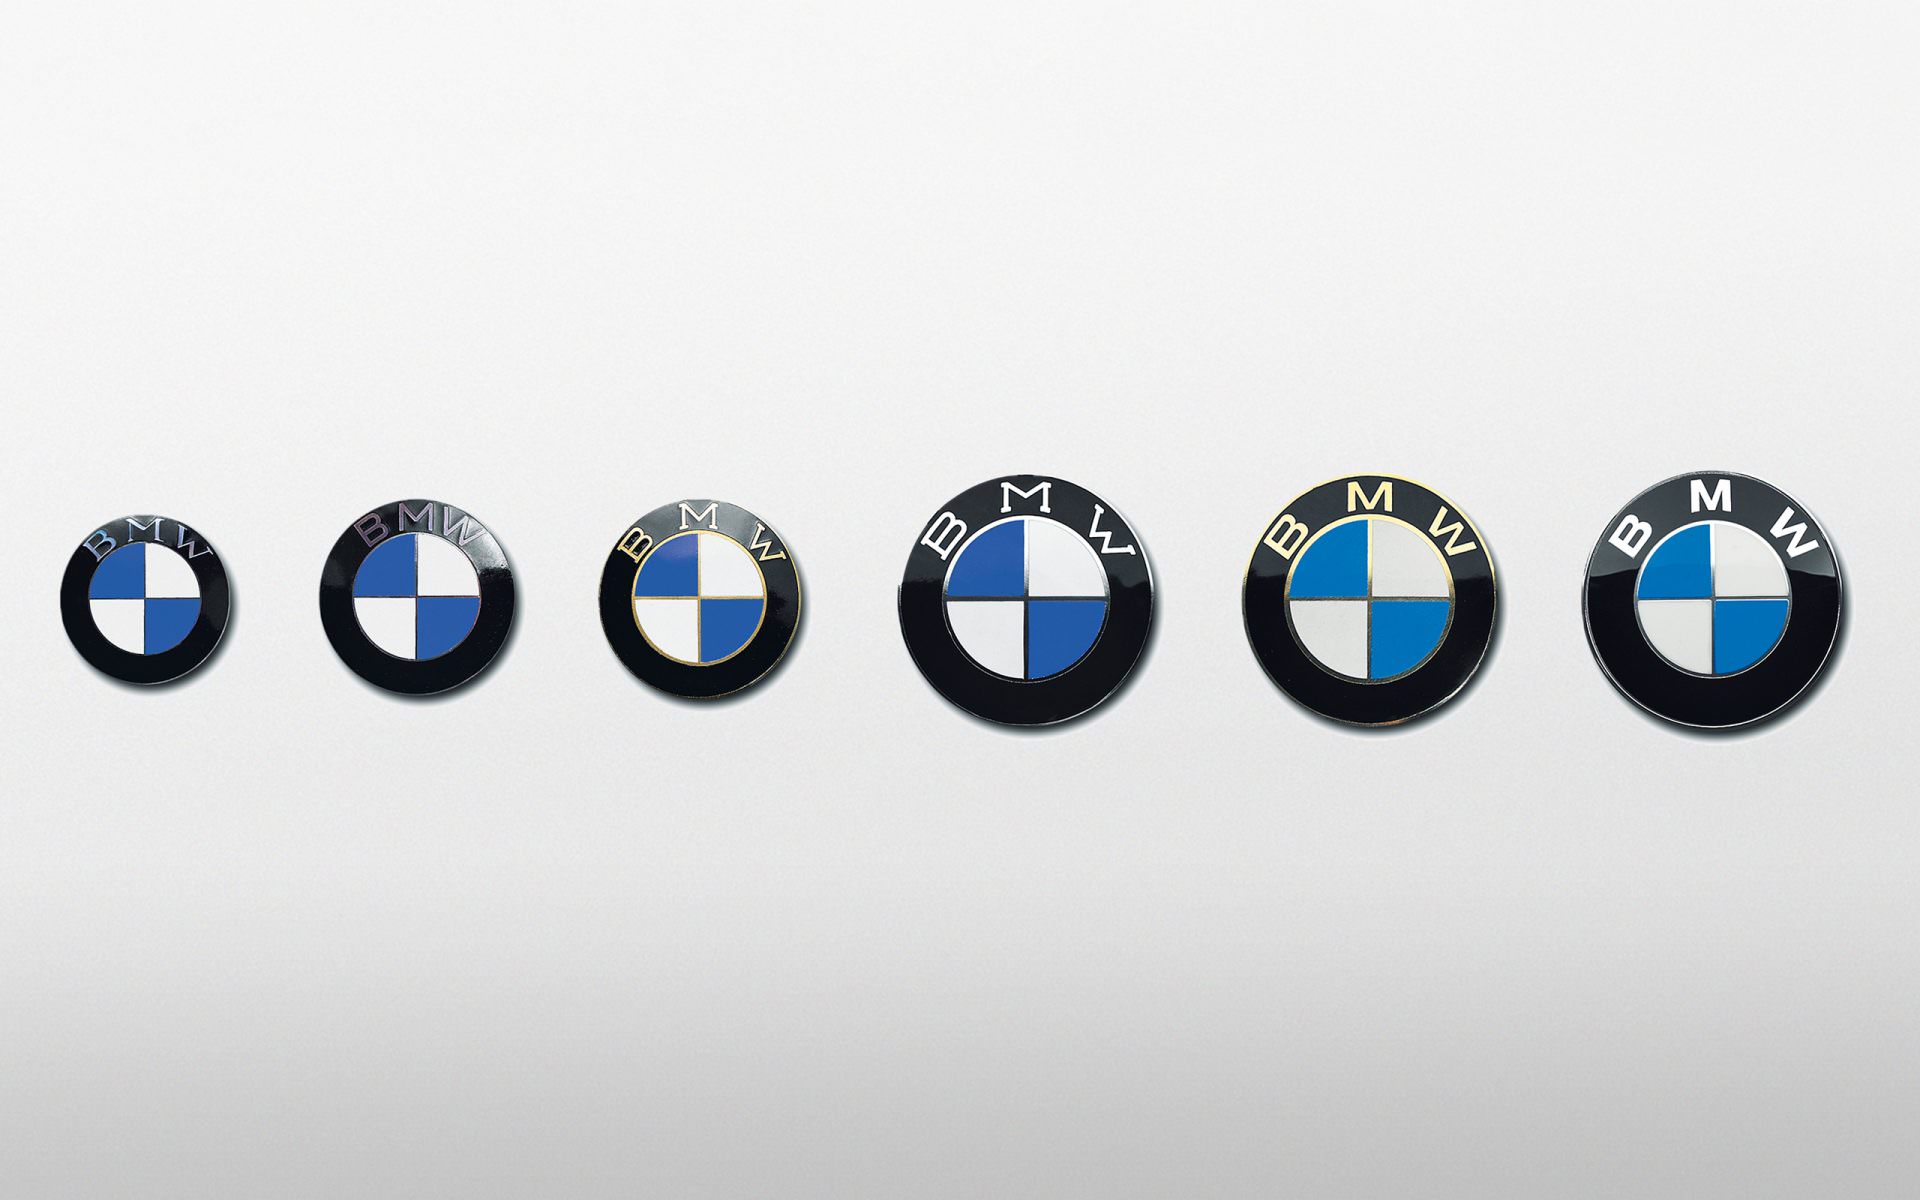 The evolution of BMW logo over time.